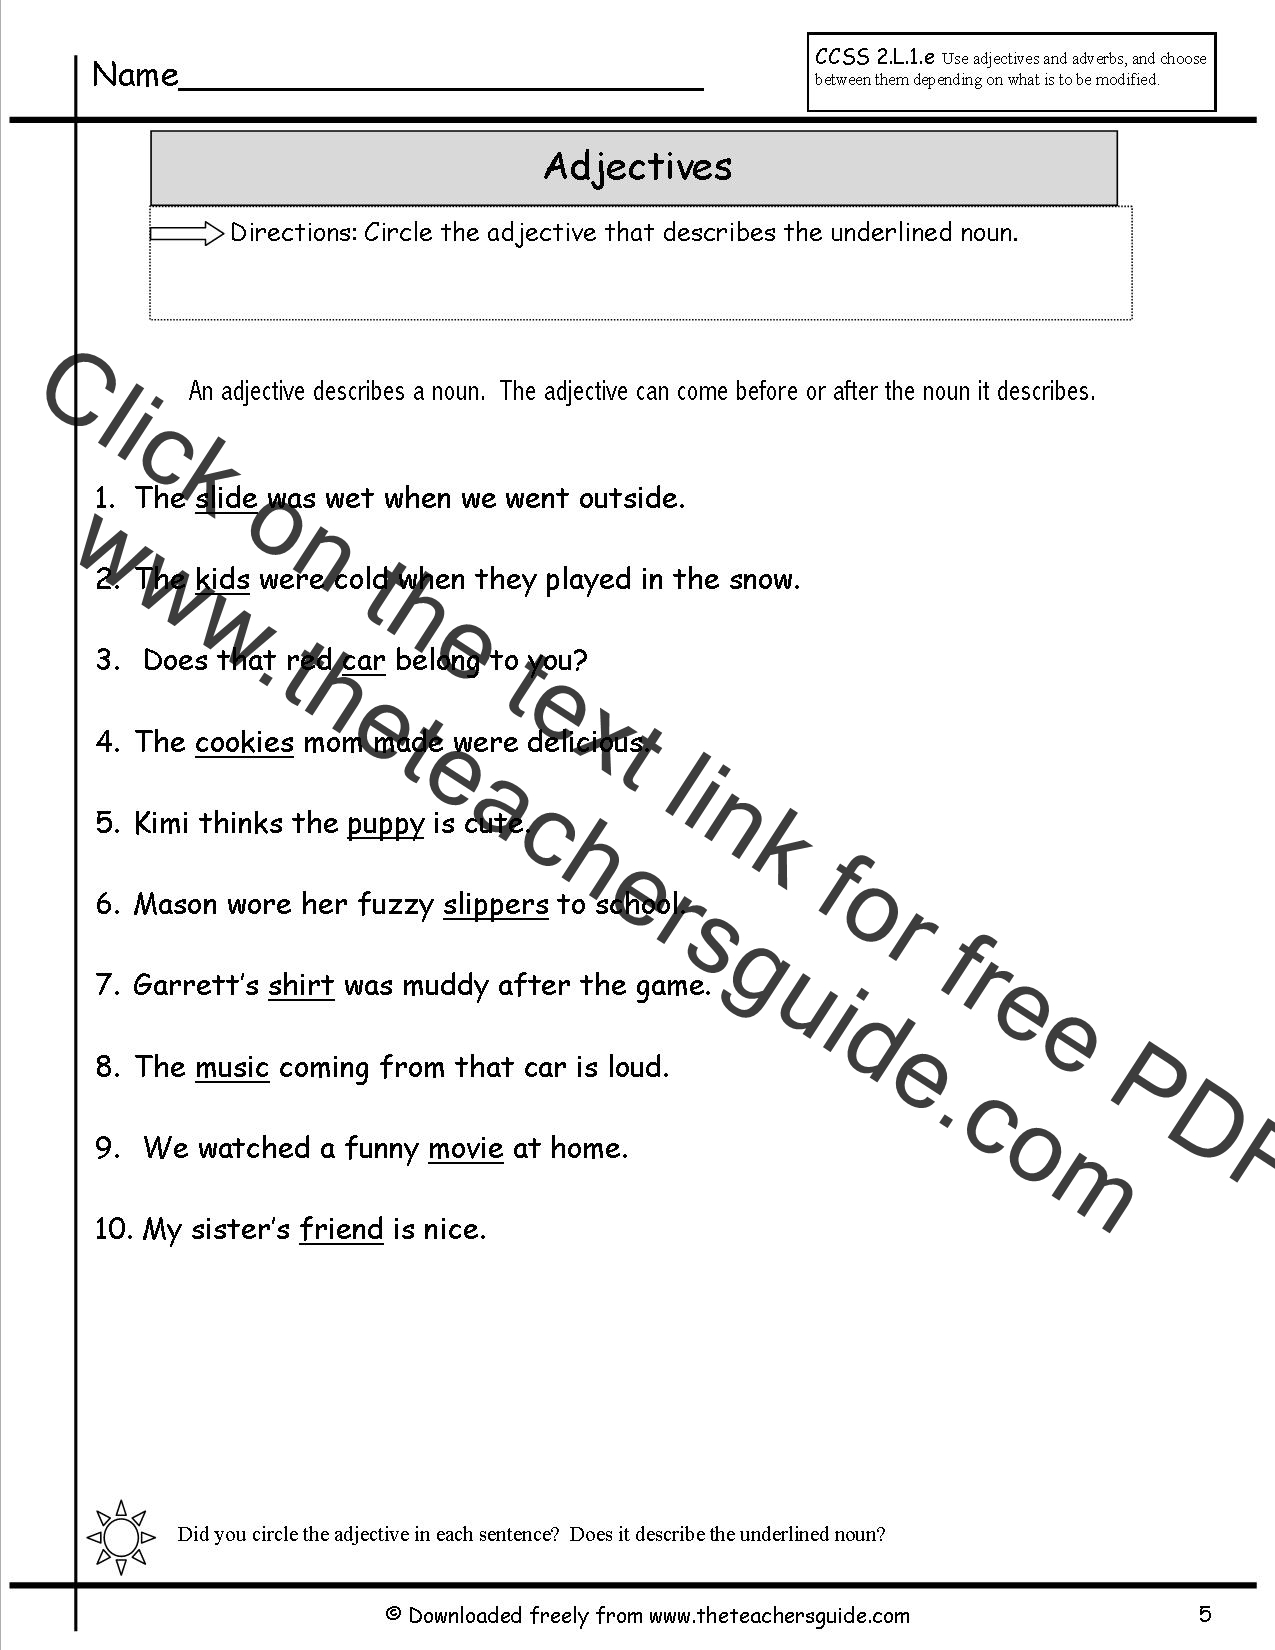 Adjectives Worksheets from The Teacher's Guide